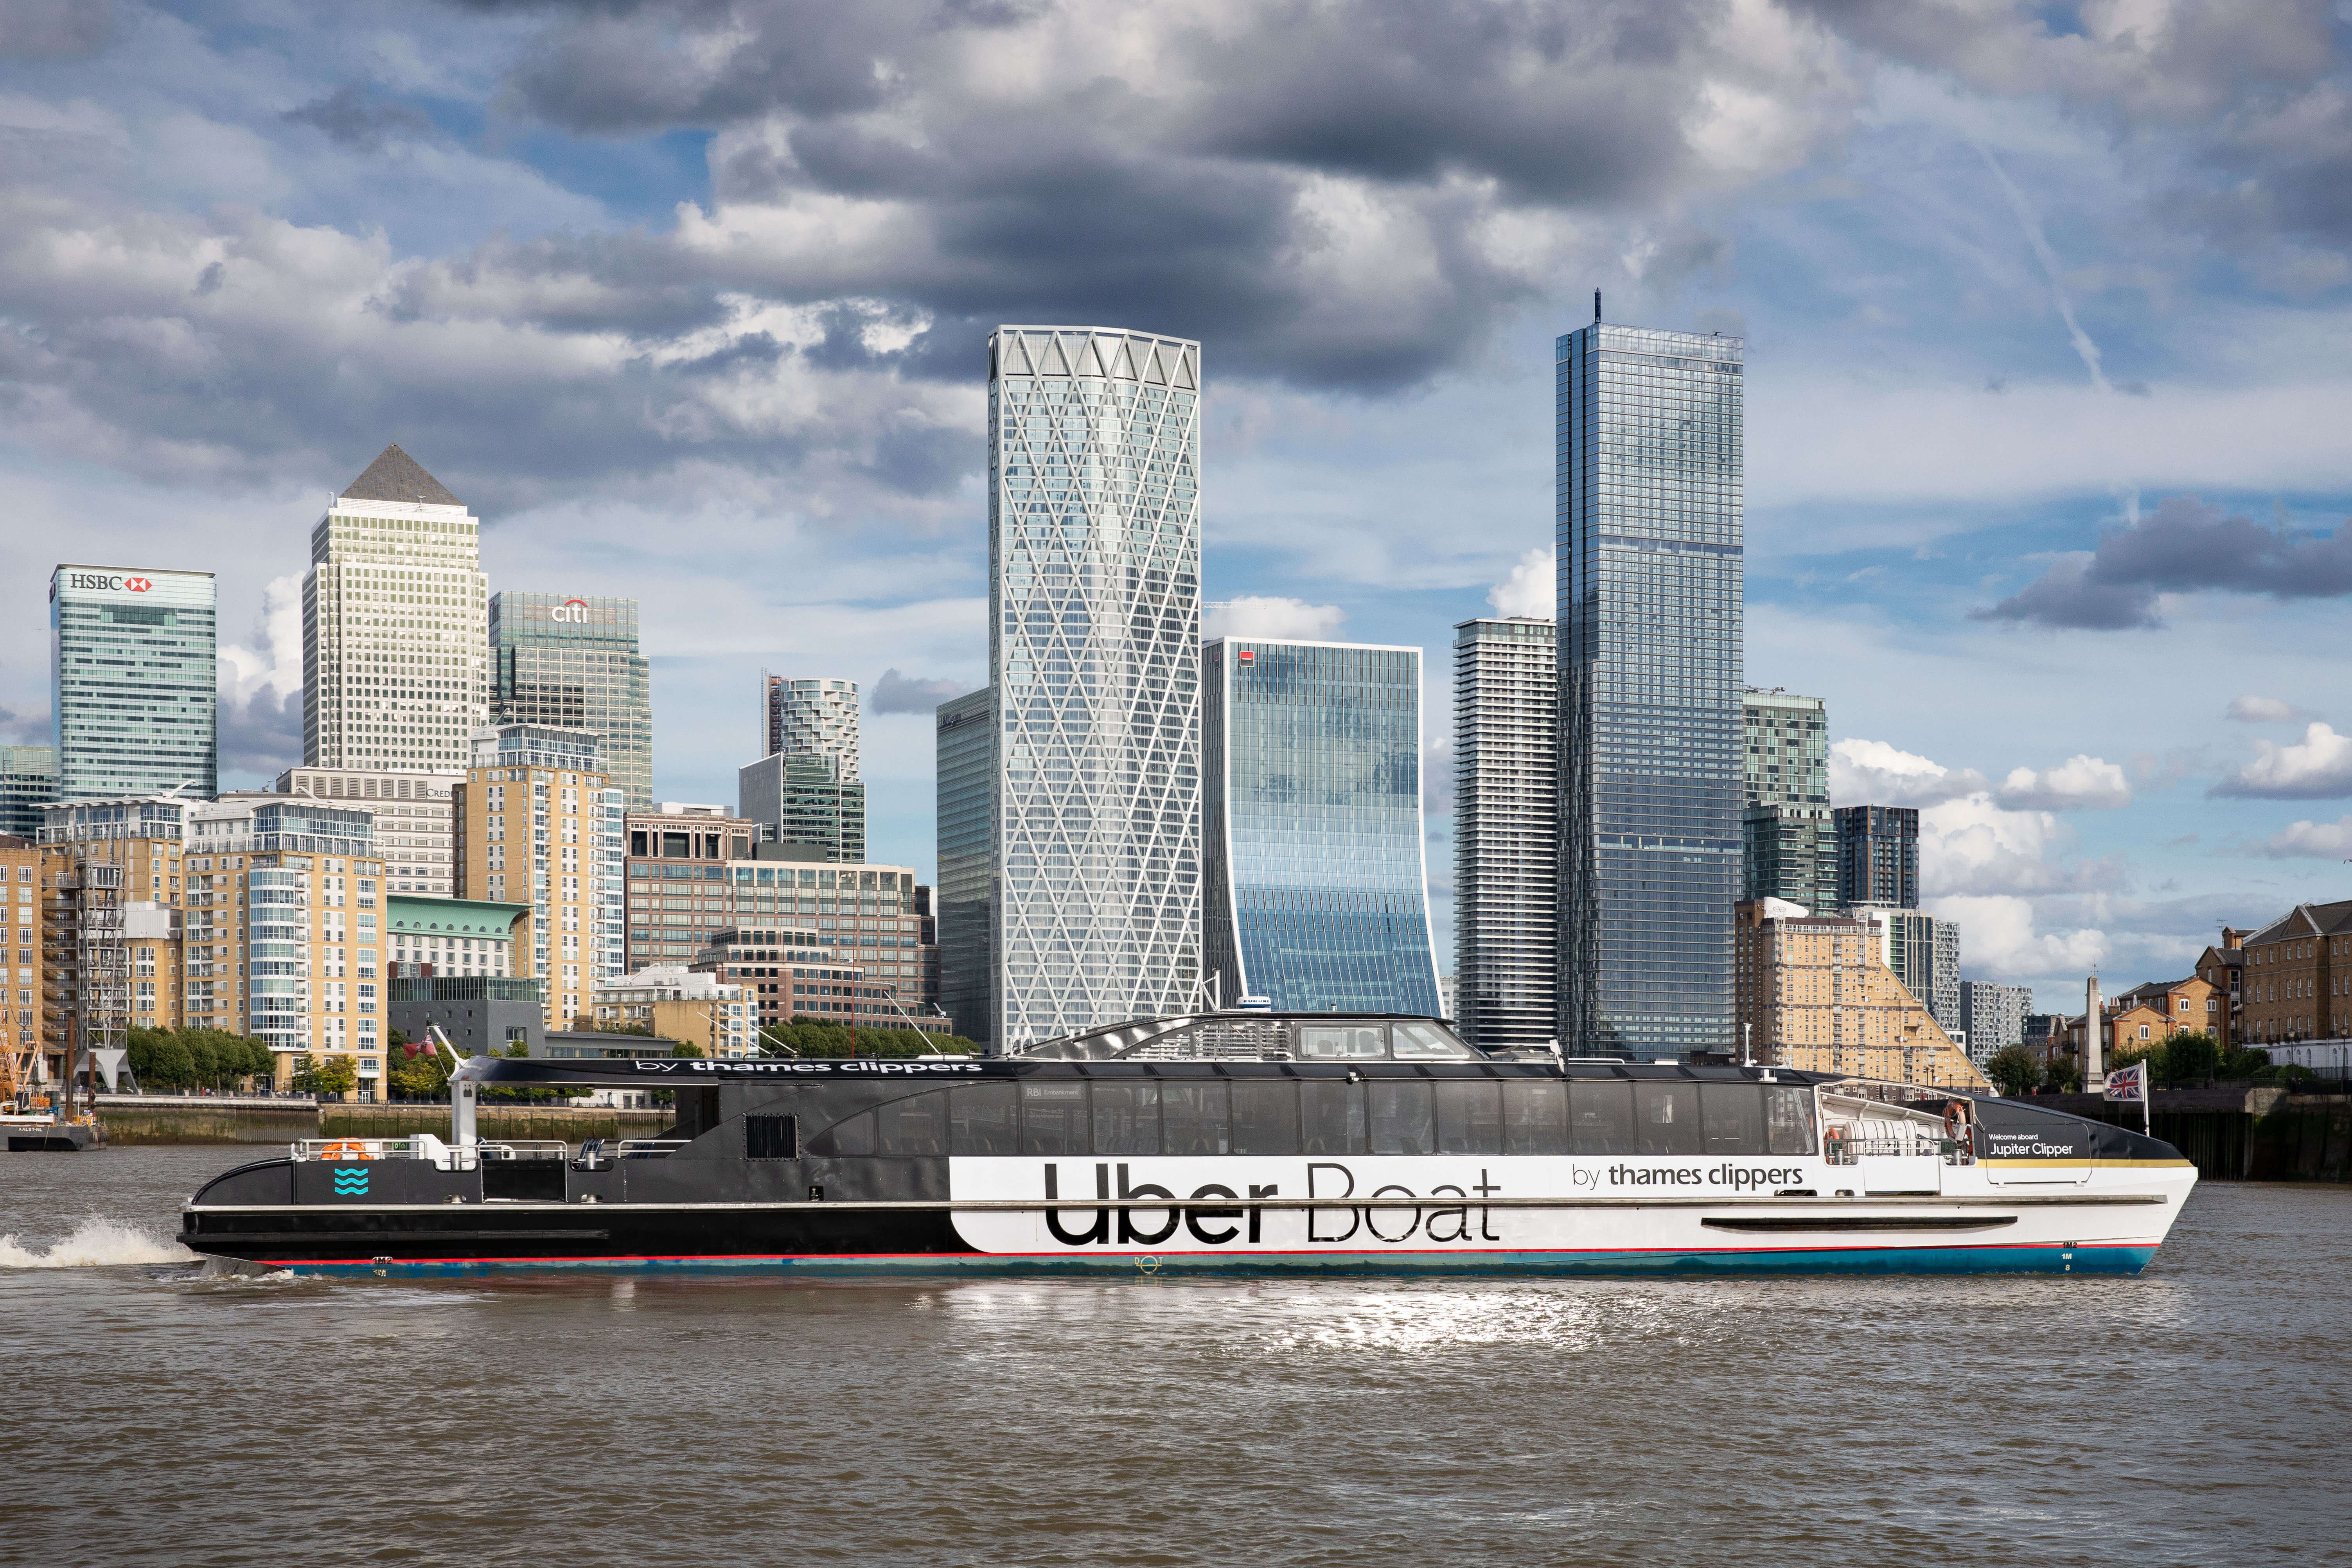 Uber_Boat_By_Thames_Clippers_2 copy